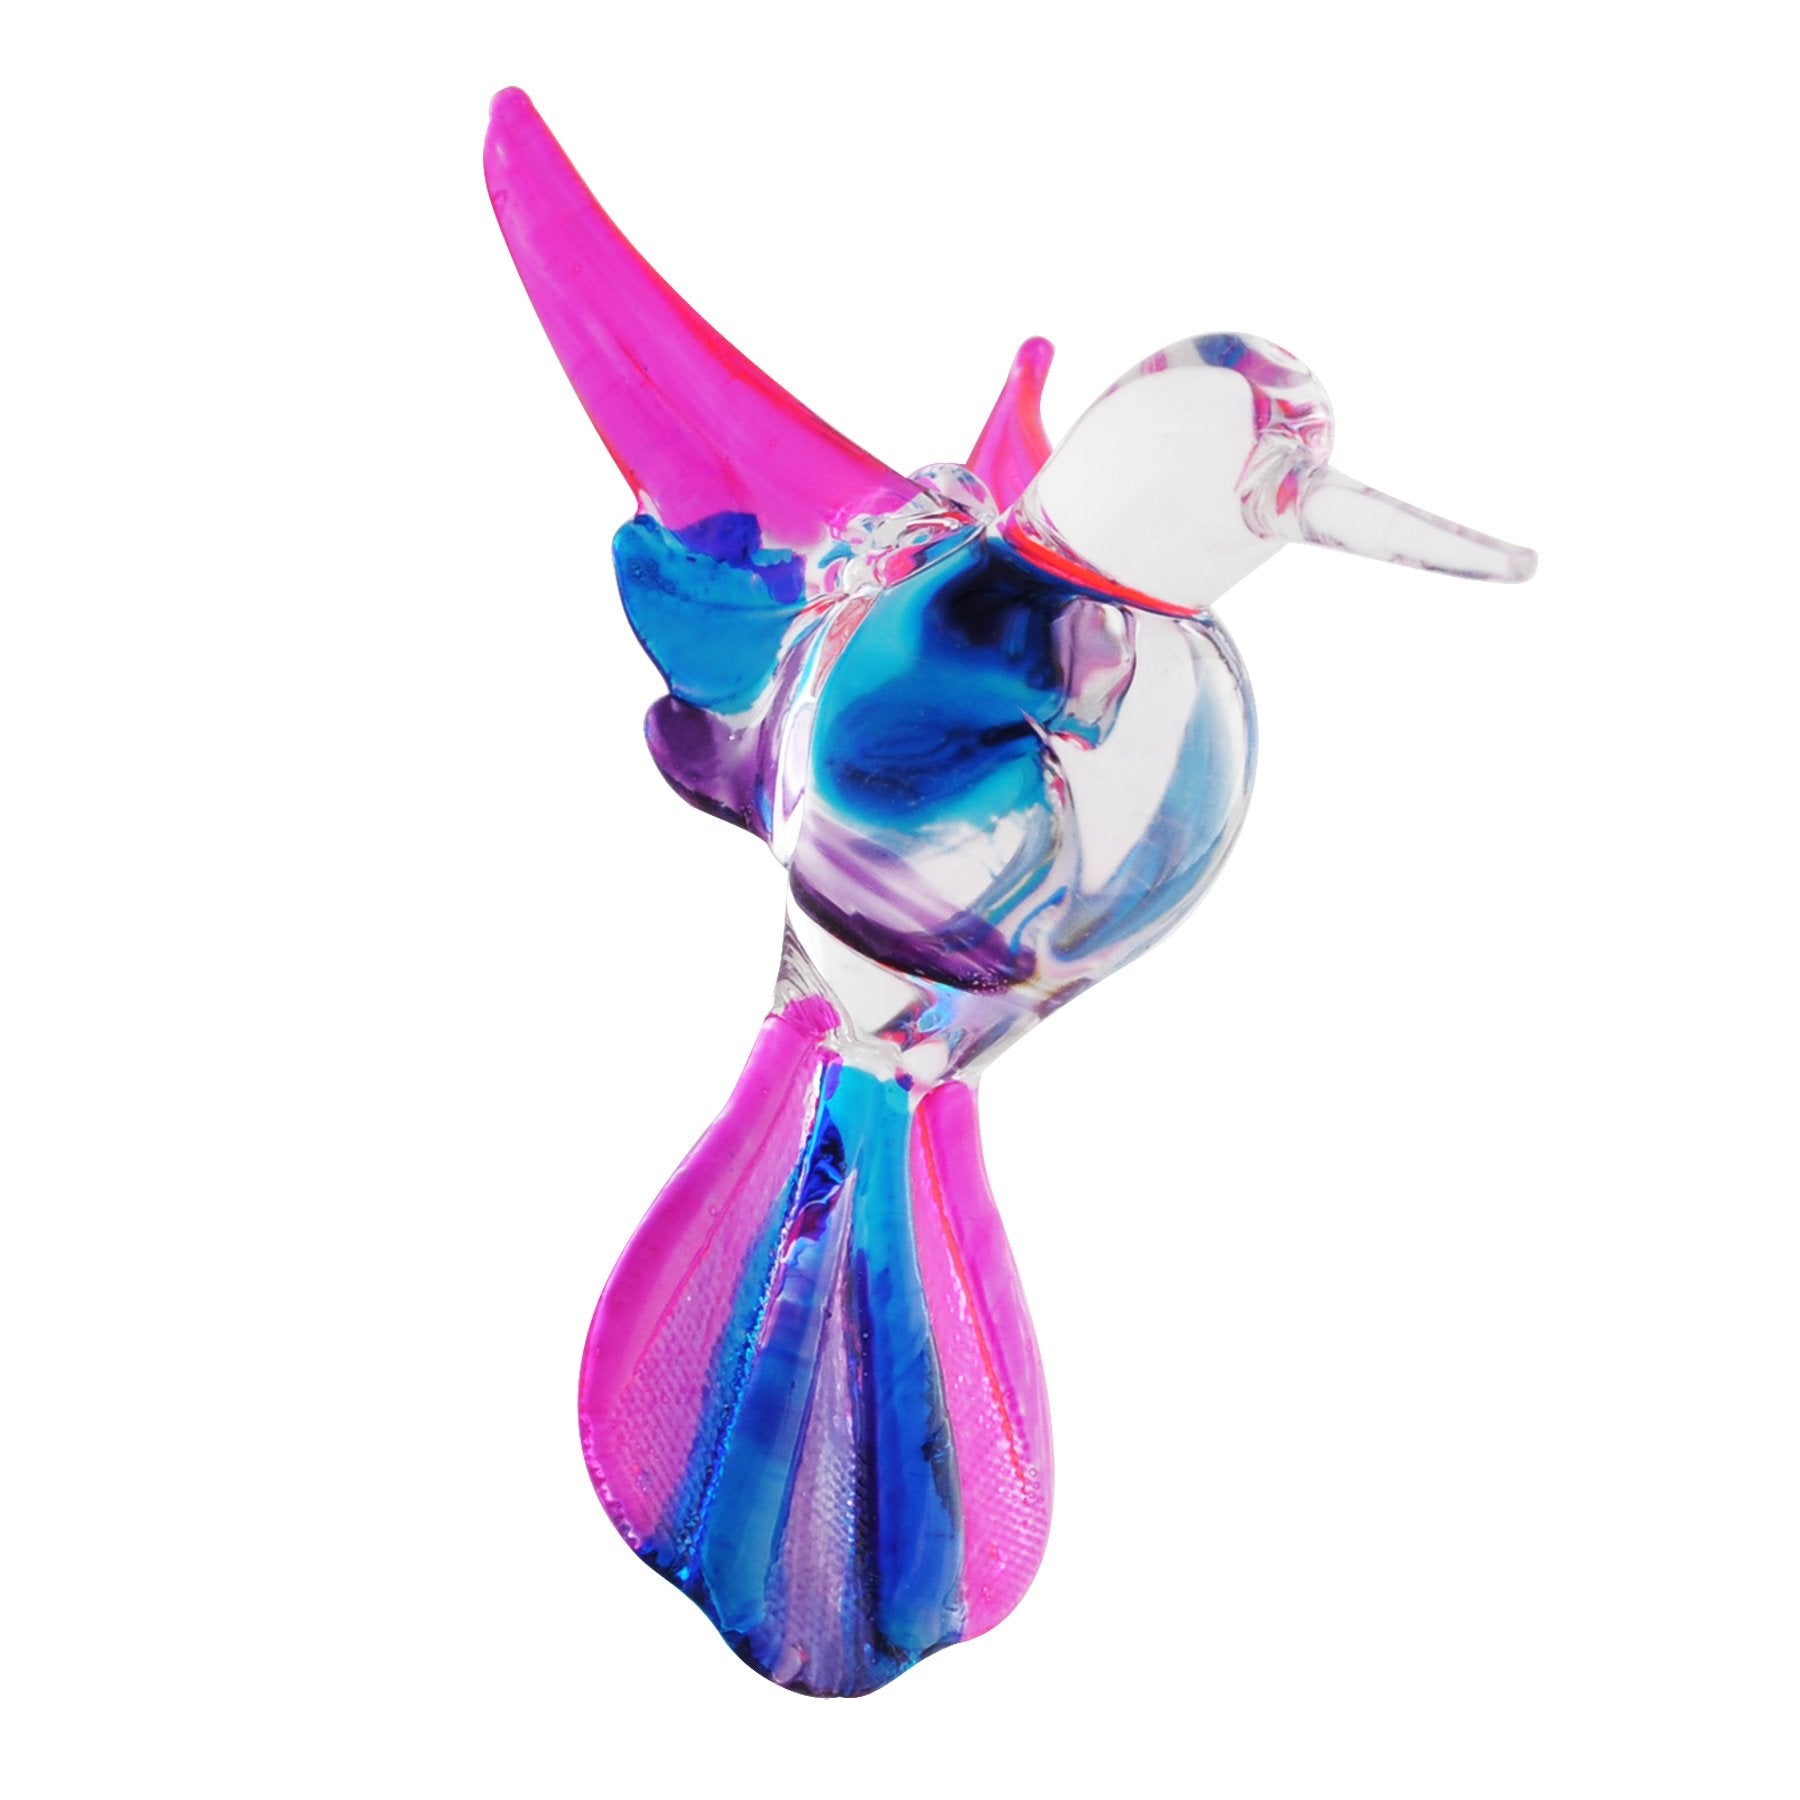 Crystal Castle Glass Multi-Colored Hummingbird ornament in Pink with Blue and Purple accents.